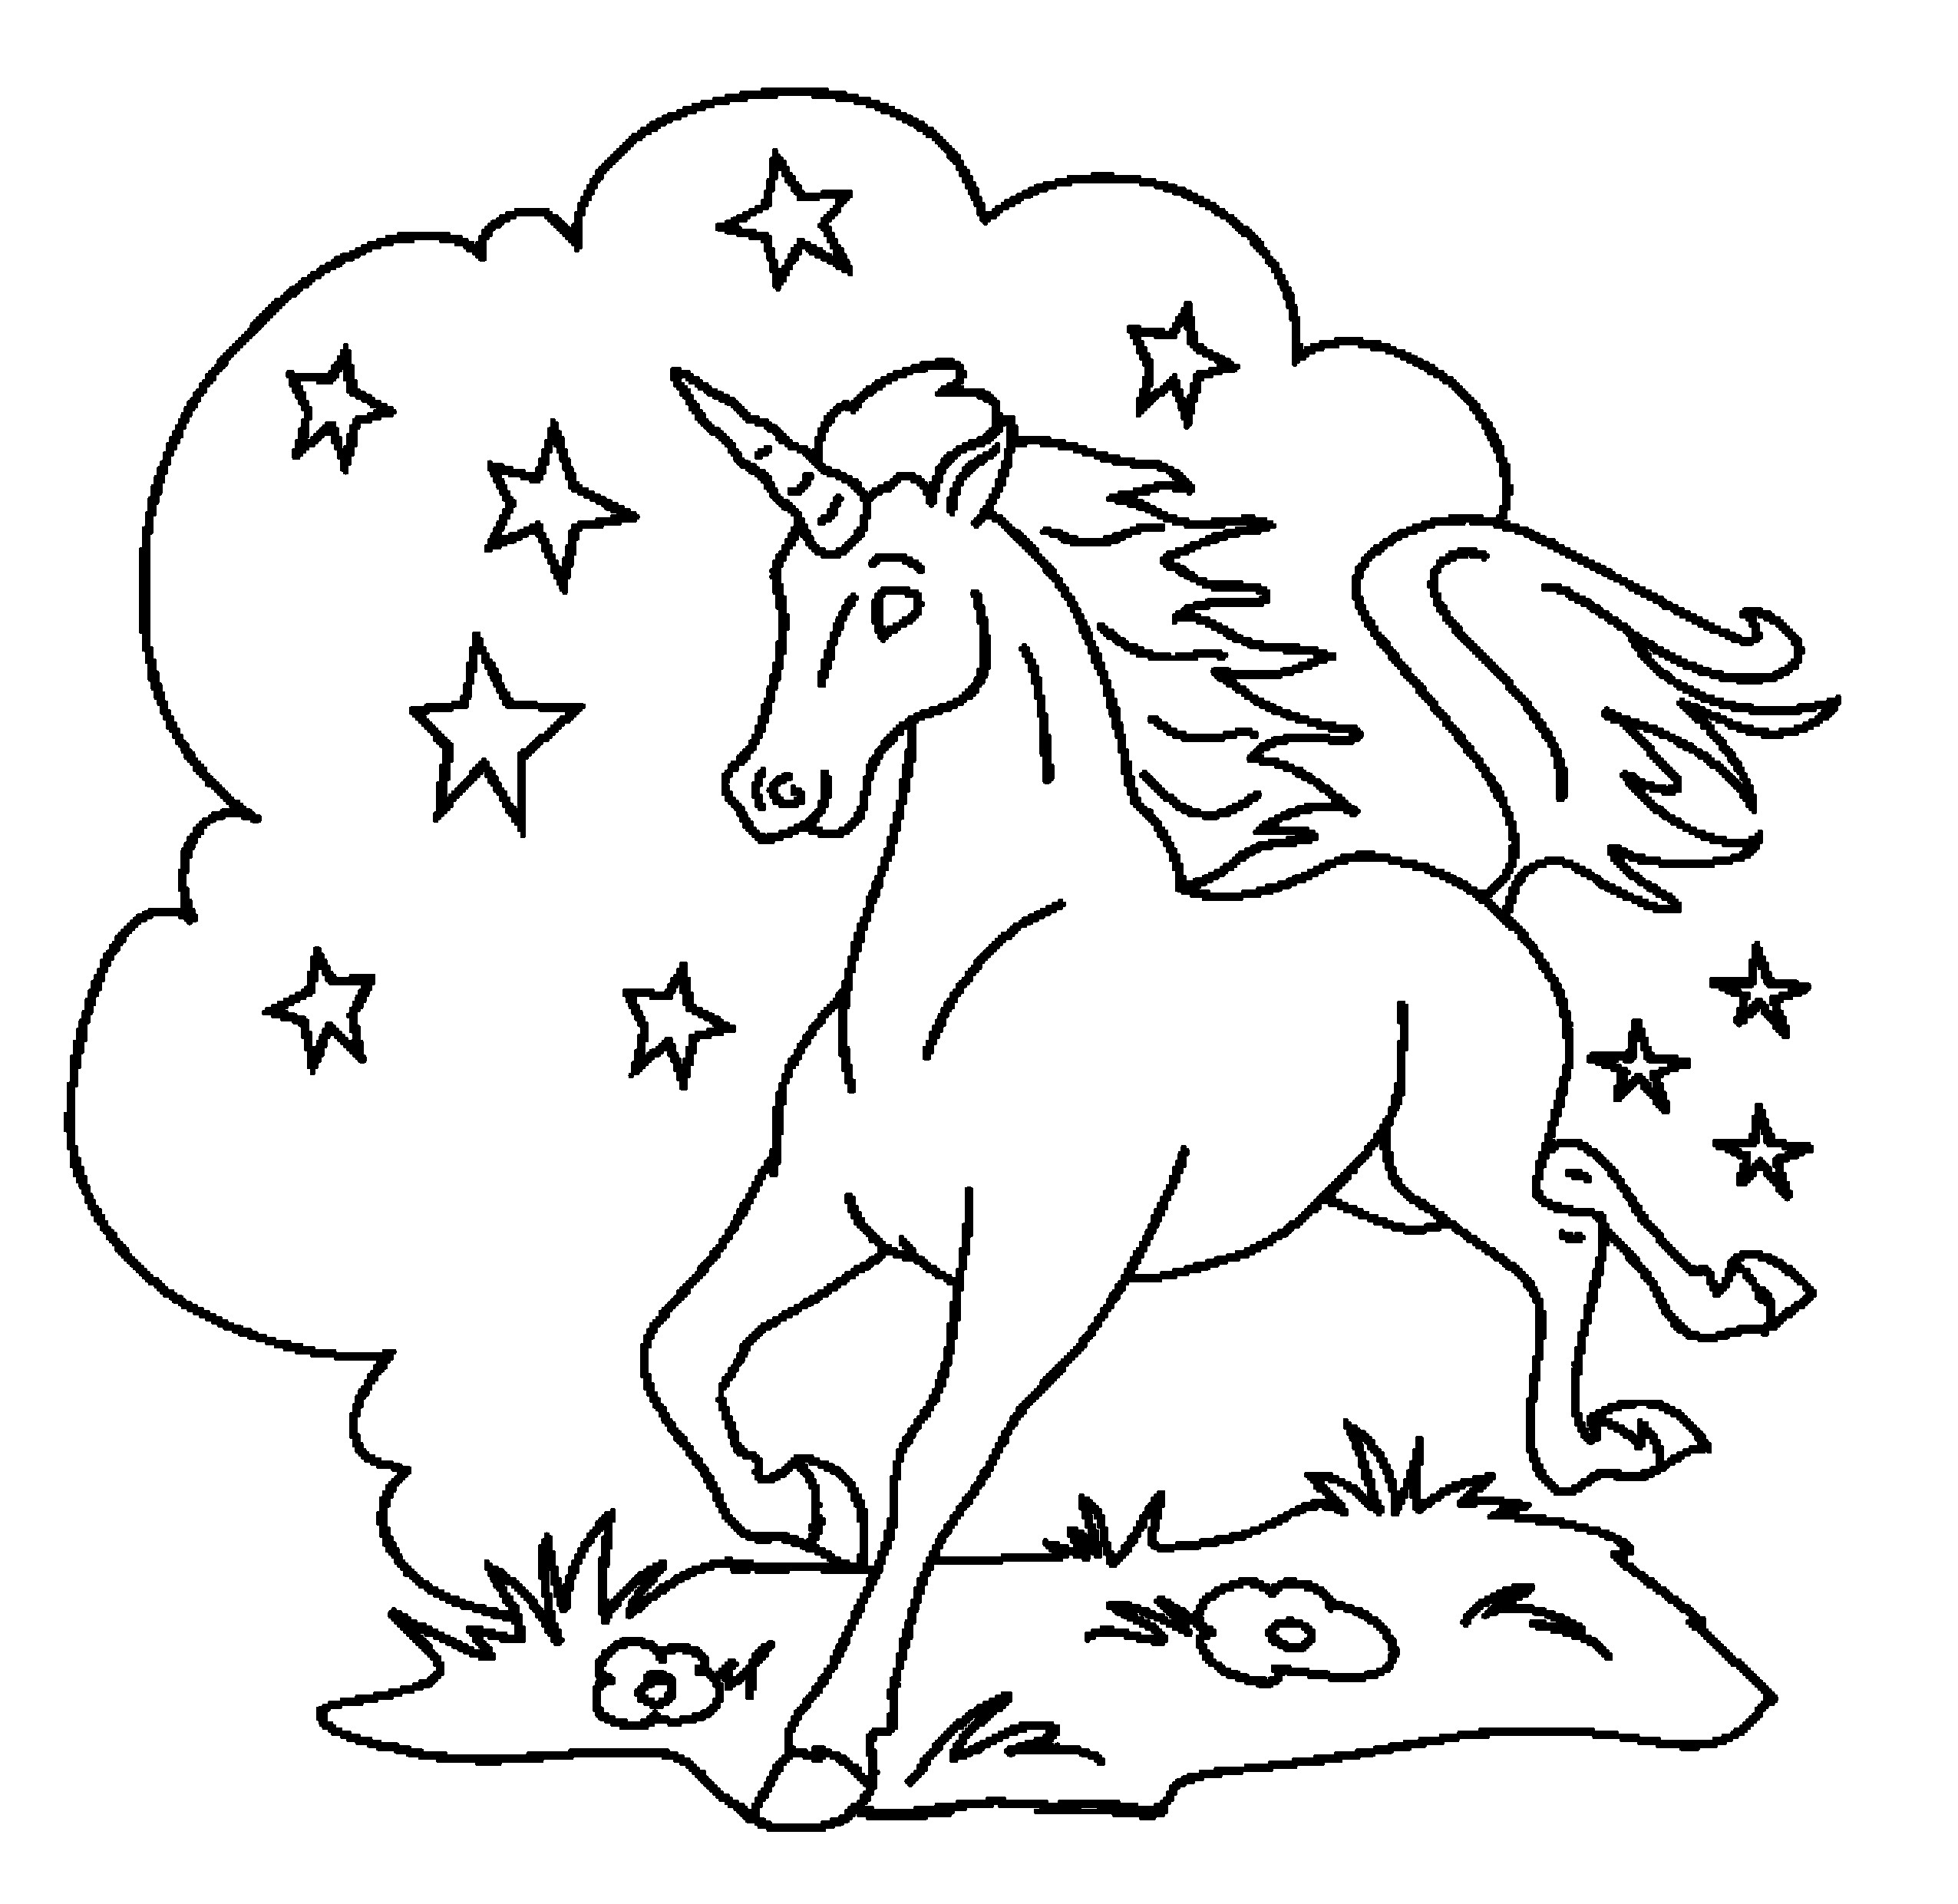 Kids Unicorn Coloring Pages
 Print & Download Unicorn Coloring Pages for Children